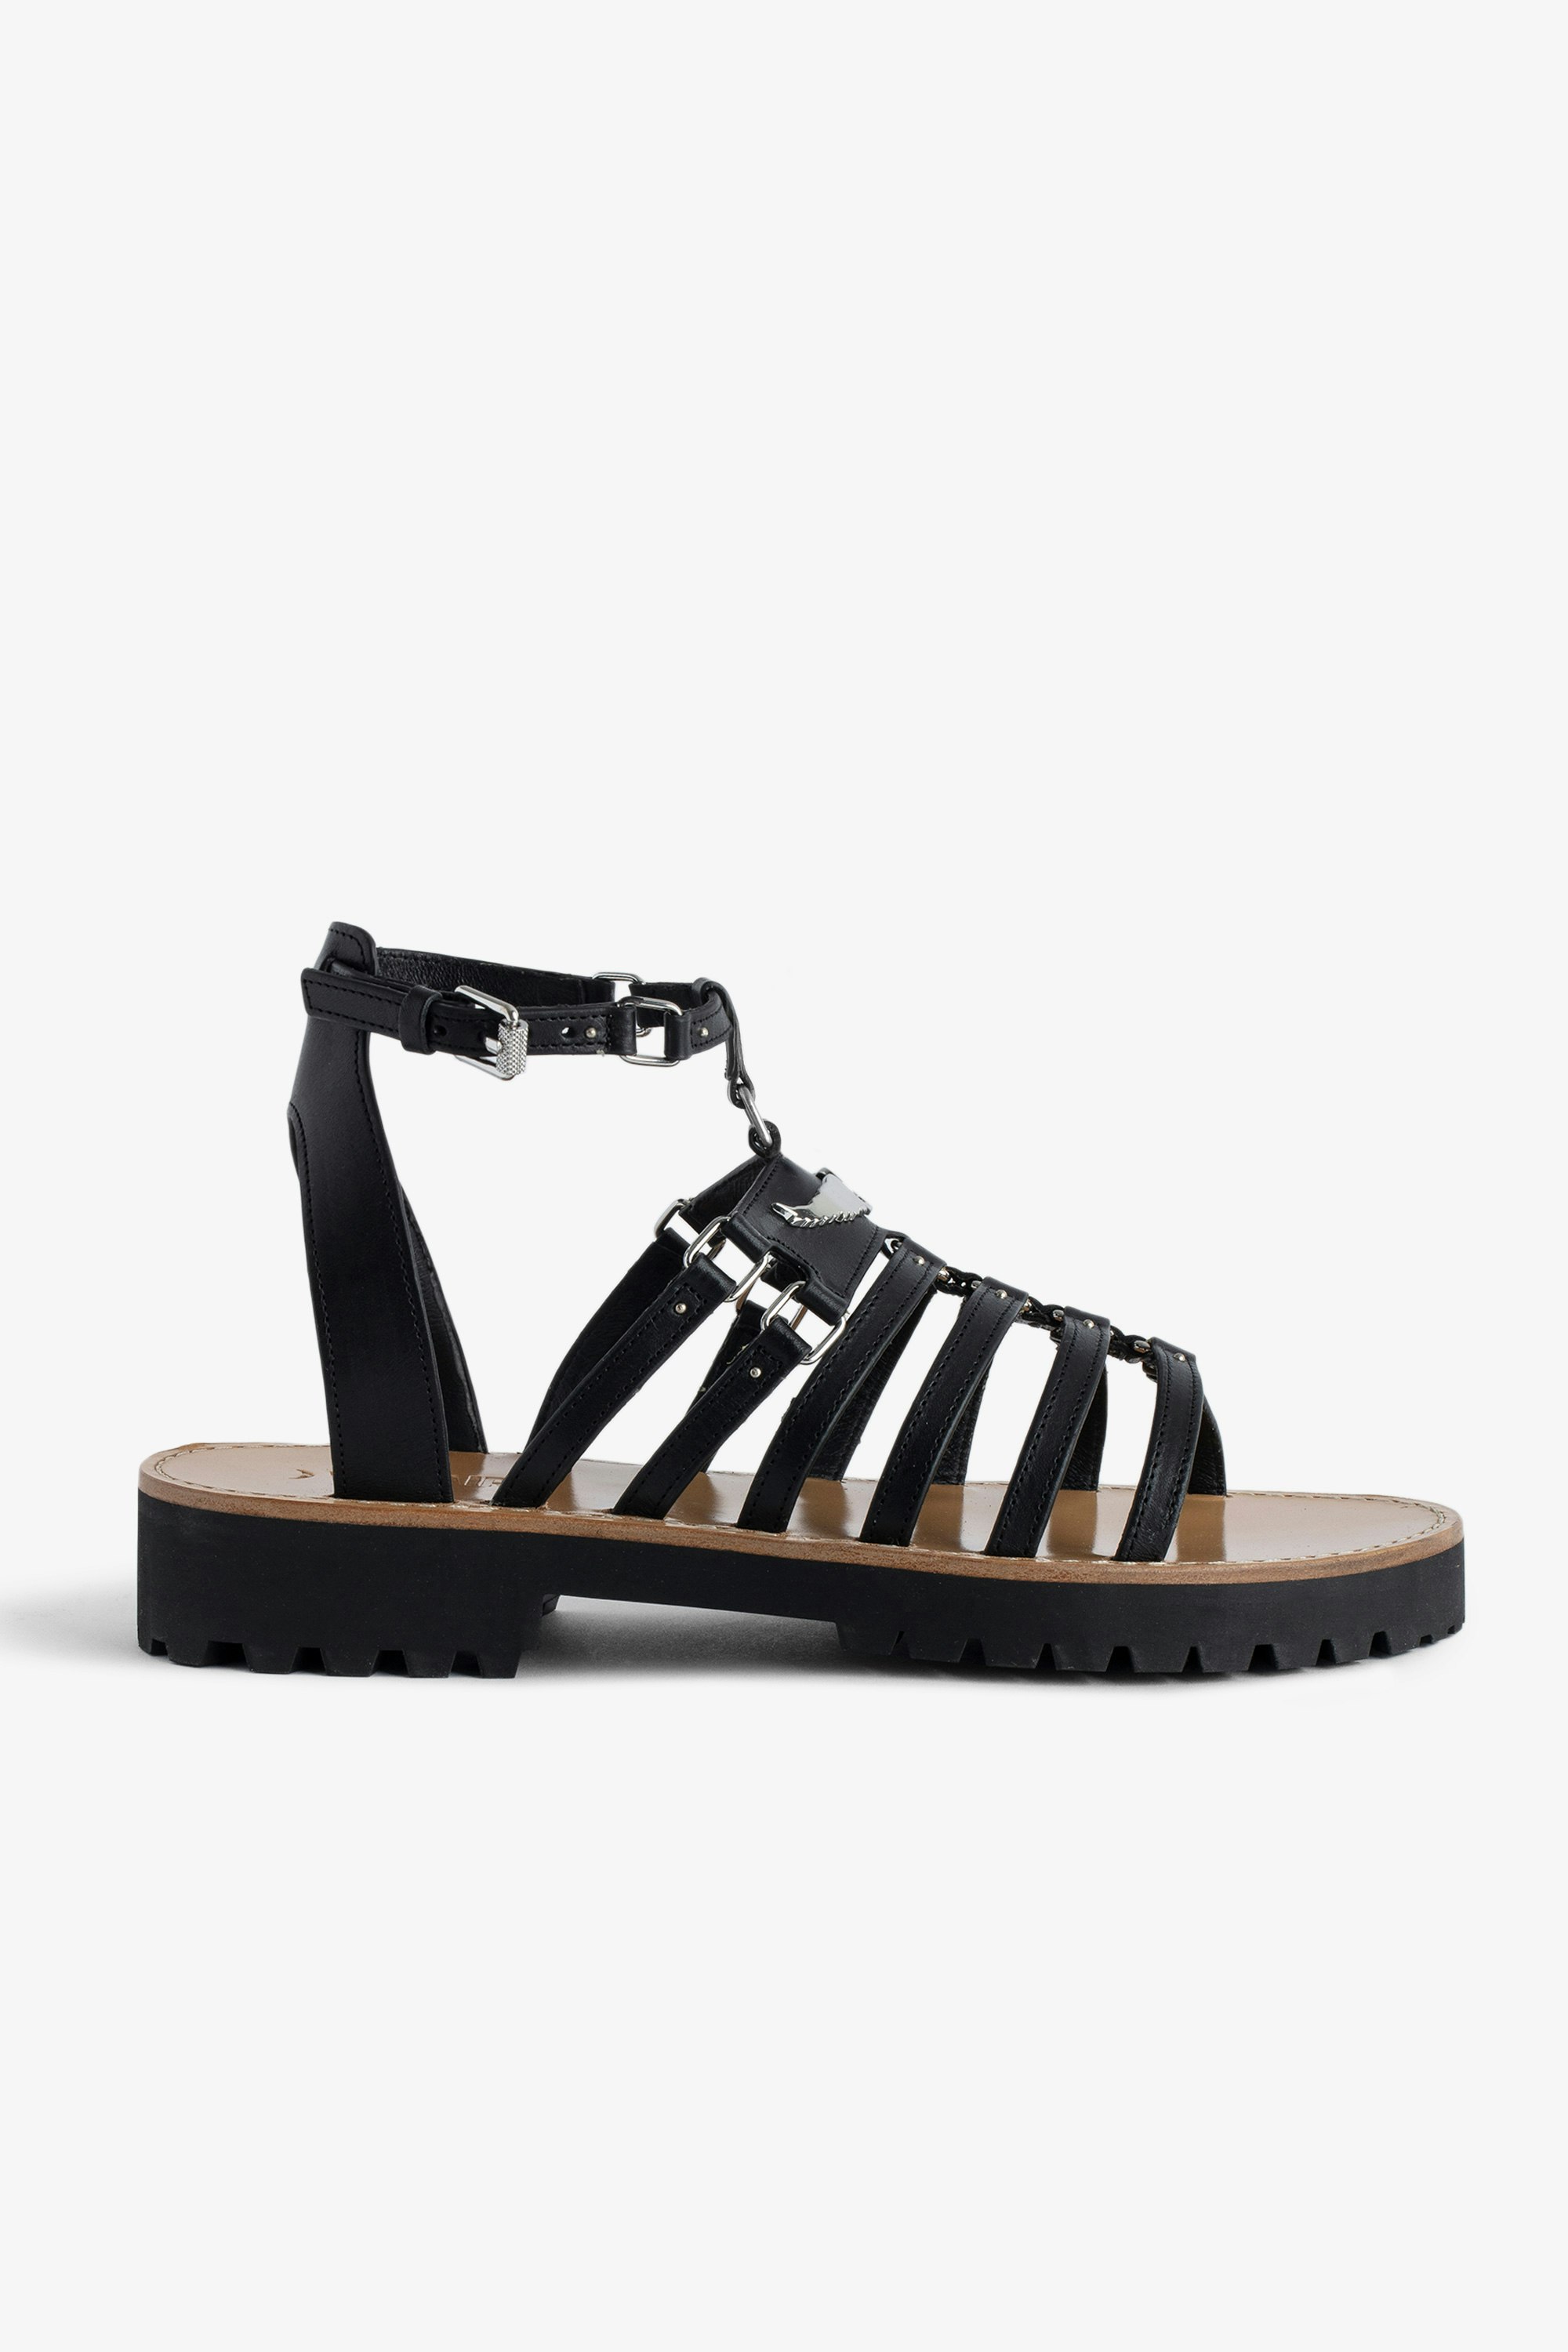 Joe Sandals - Black vegetable-tanned leather sandals with straps, adjustable buckle and wings charm.